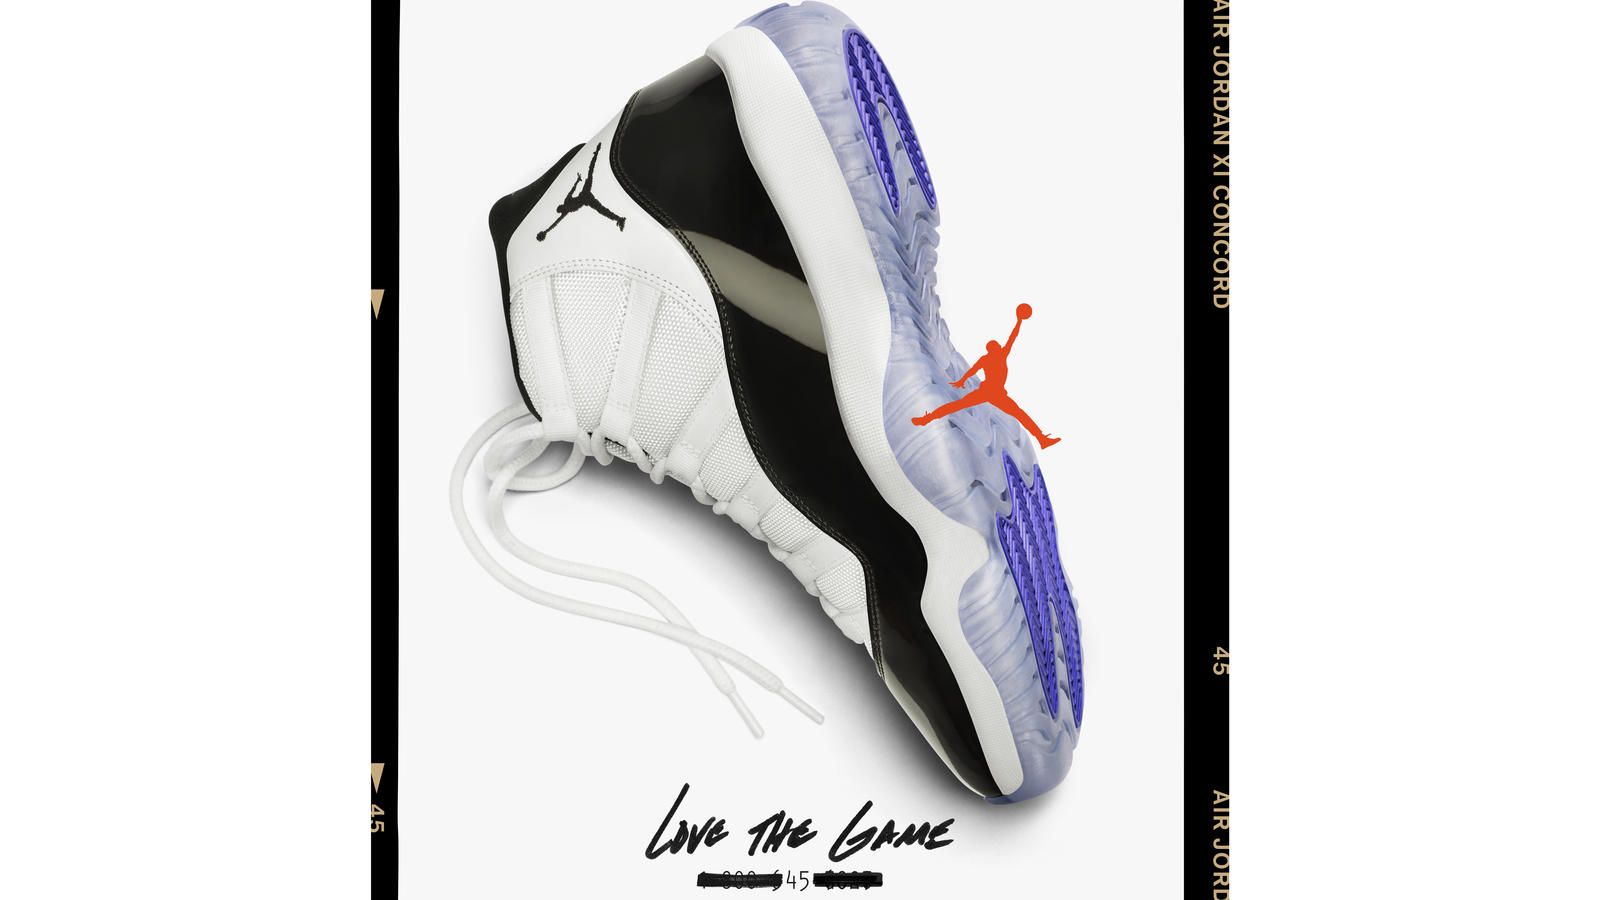 Air Jordan 11 Concord Official Release Date and Image